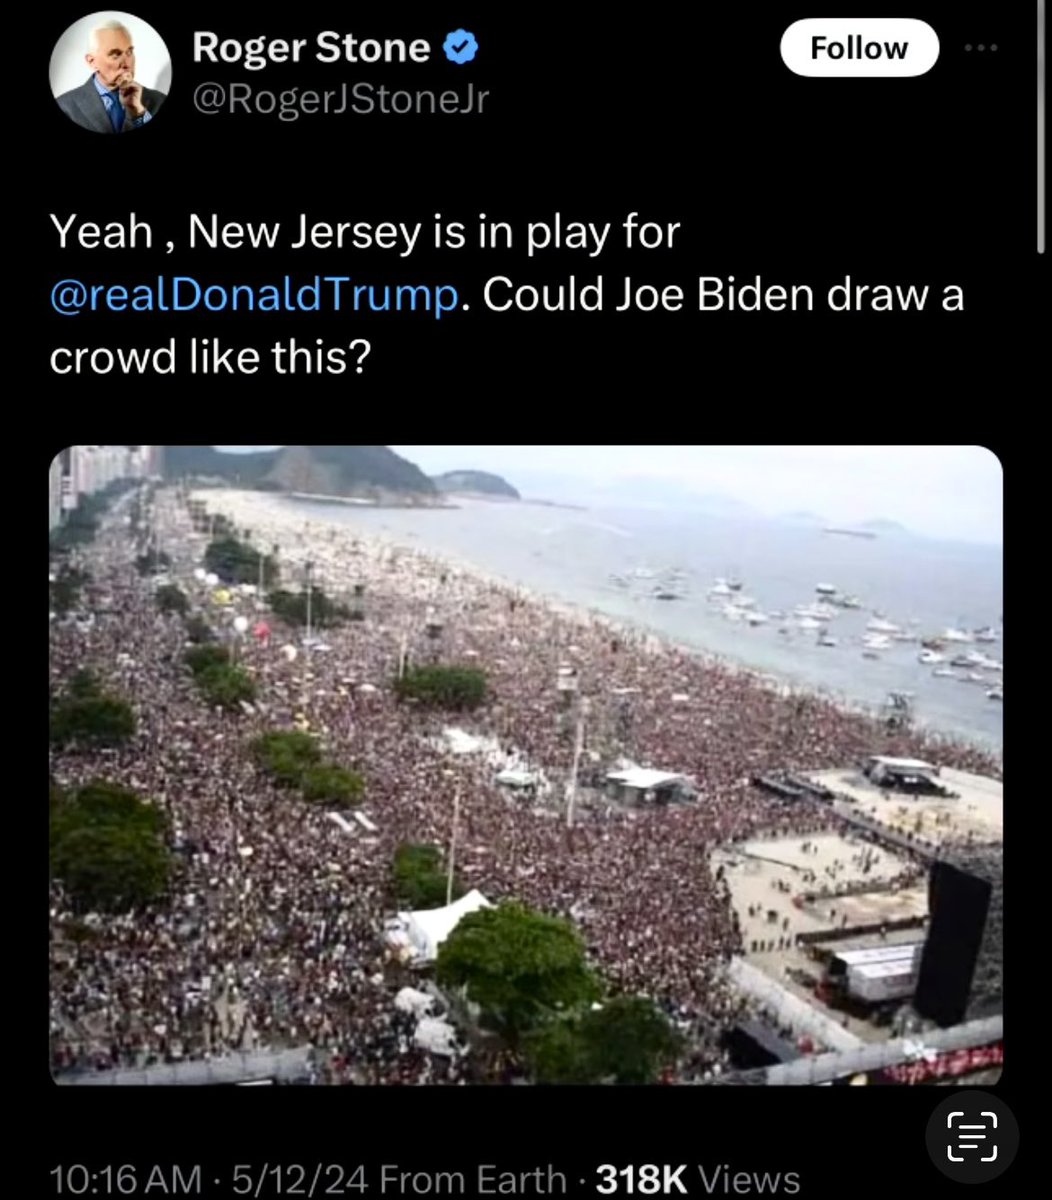 I just can't with these people. If the turnout was so great they wouldn't need to use a fake picture from a Rod Stewart concert in Brazil. 🤦🏻‍♀️🤦🏻‍♀️🤦🏻‍♀️